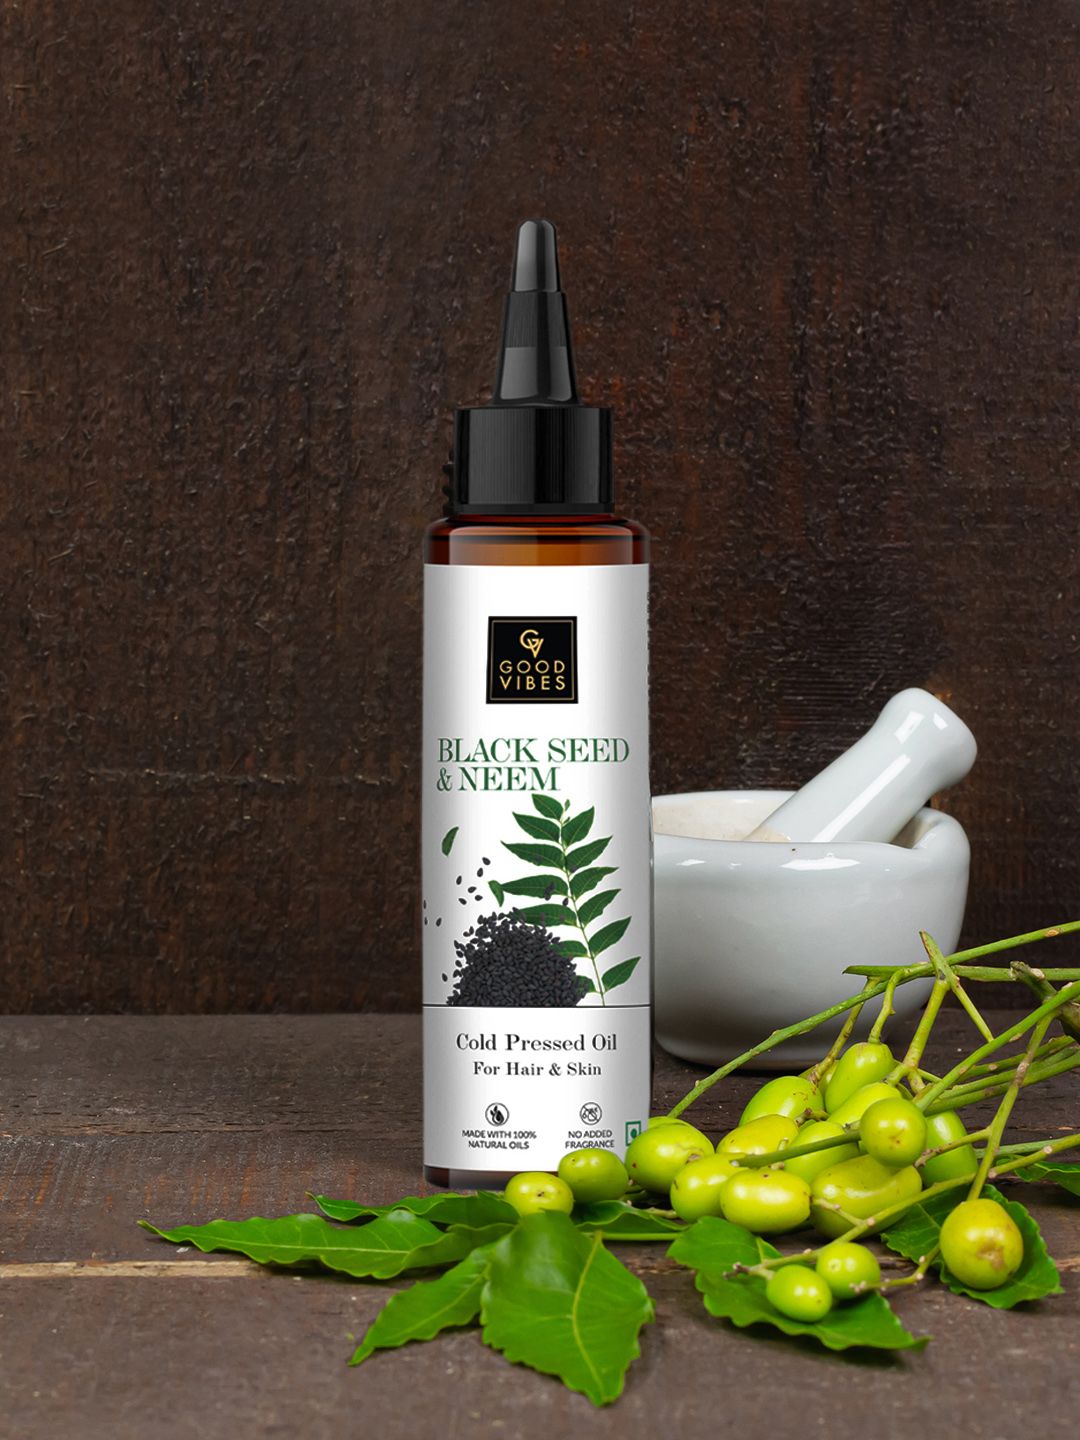 Good Vibes Unisex Black Seed & Neem Cold Pressed Oil For Hair & Skin -100 ml Price in India